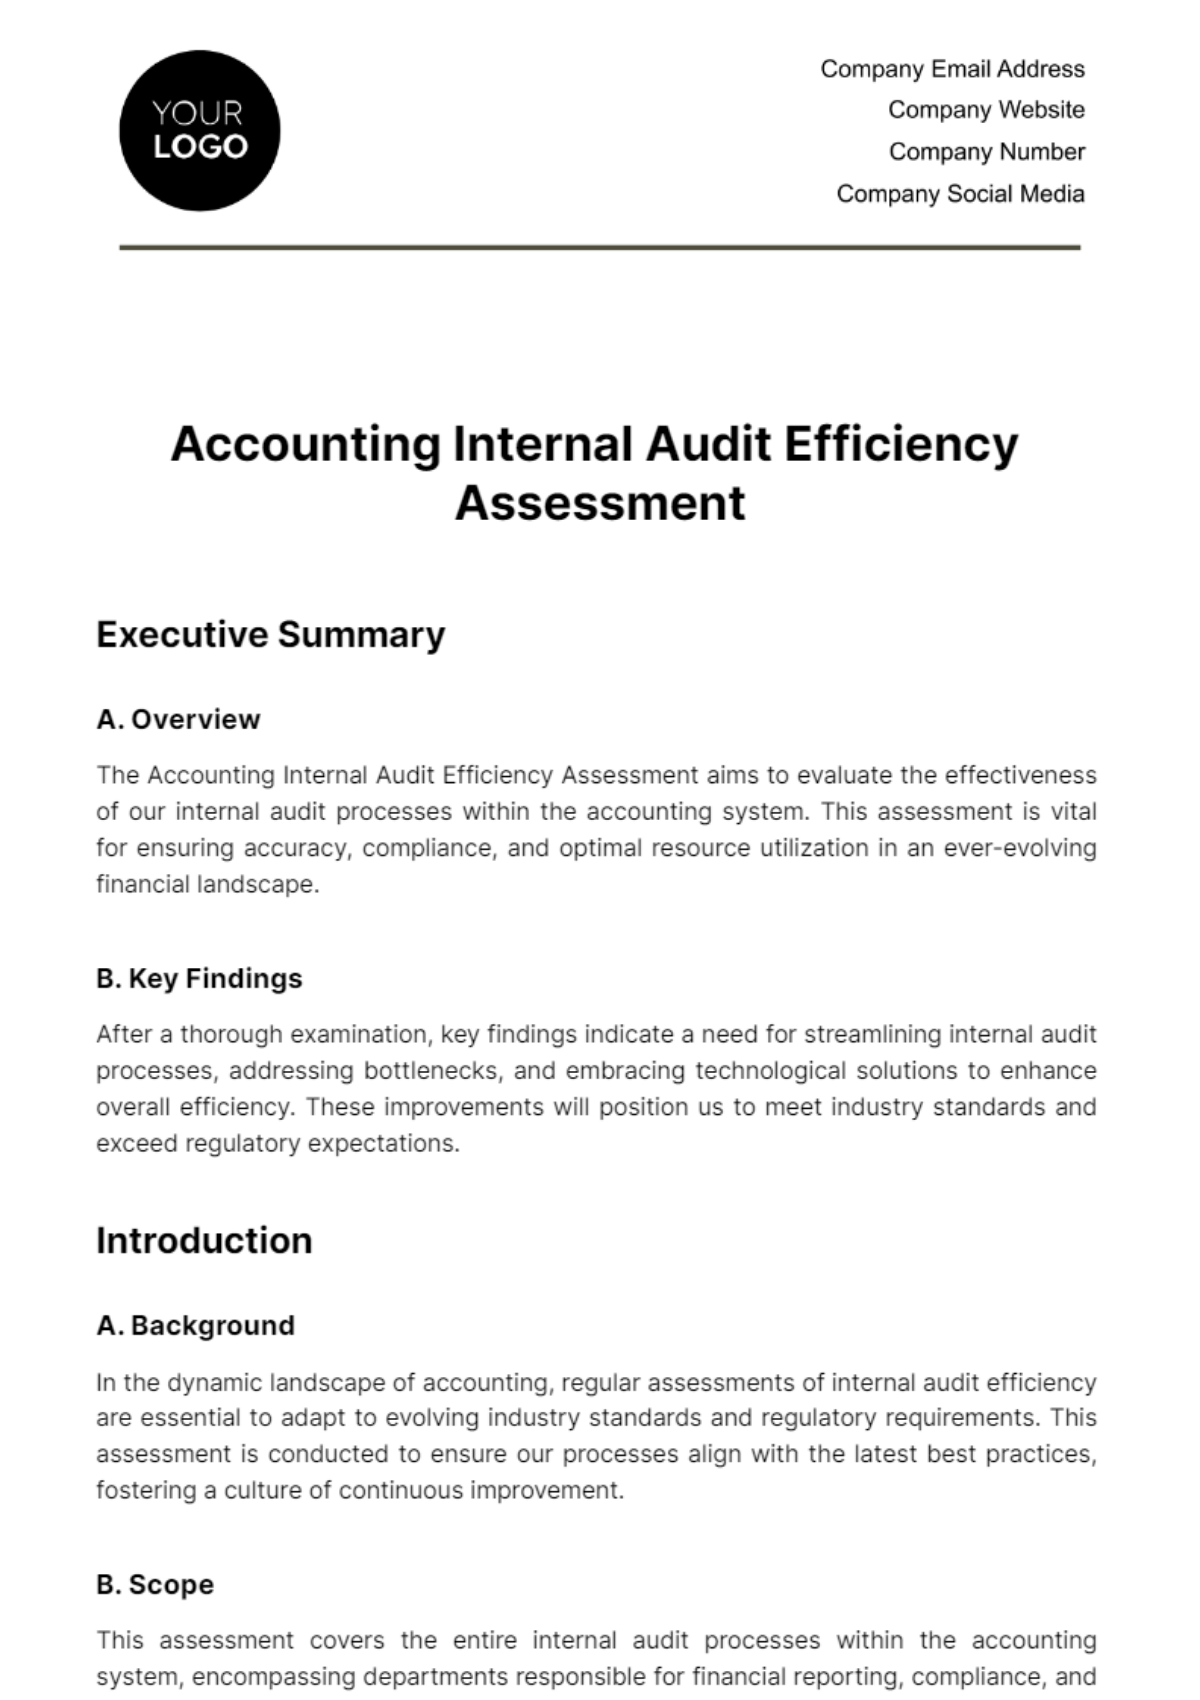 Free Accounting Internal Audit Efficiency Assessment Template